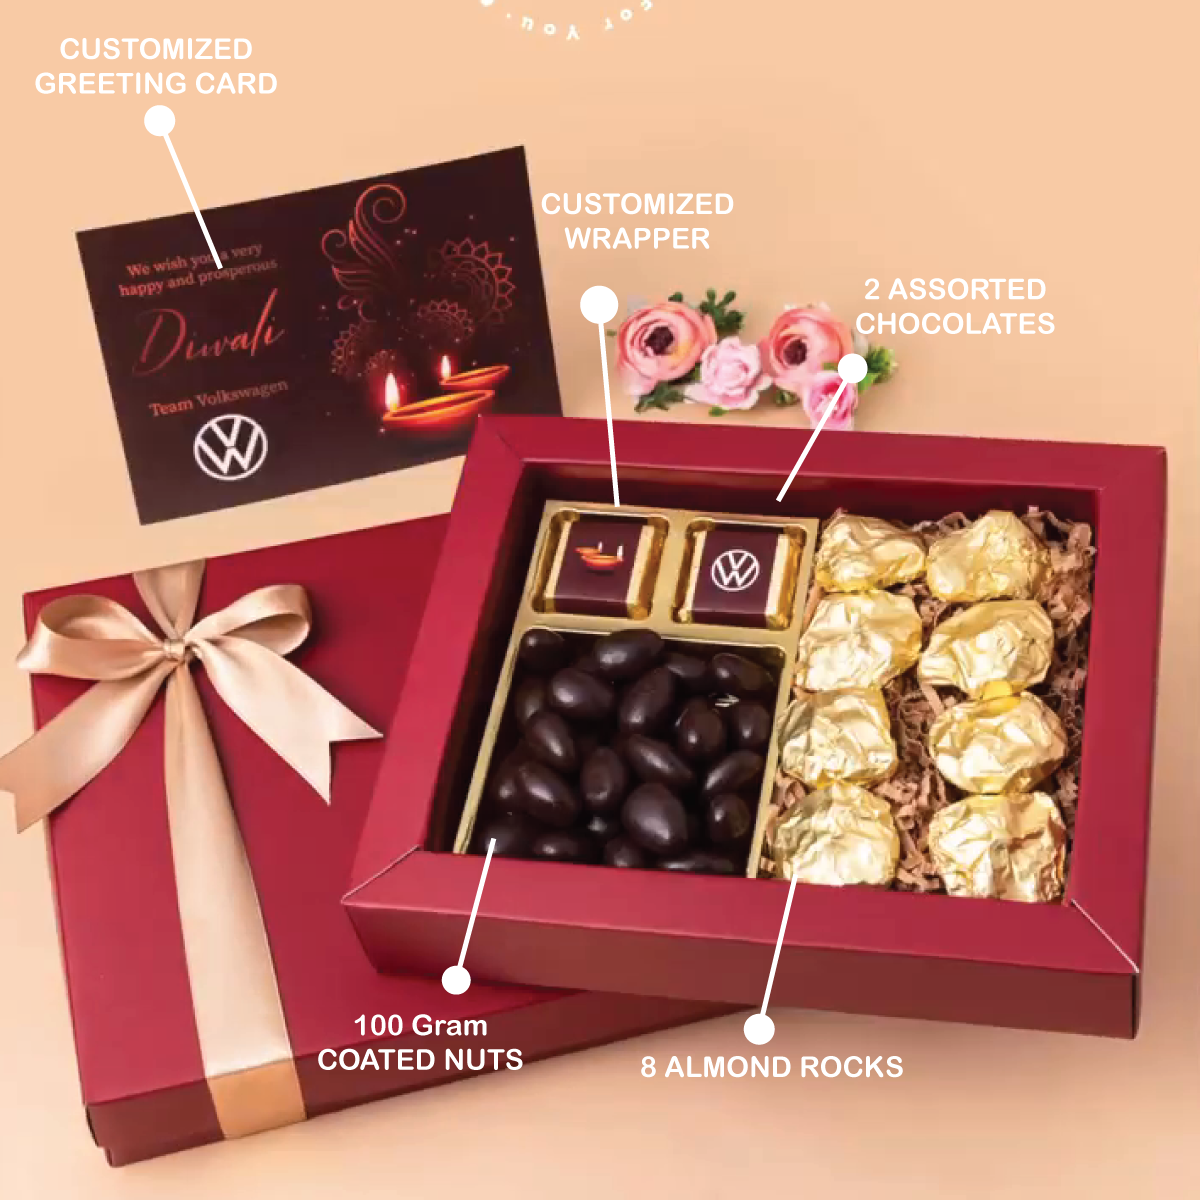 Buy Customized Chocolate Wrapper with Greeting Message Chocolates, and  English Brittles Combo Gift Set - For Employees, Dealers, Customers,  Stakeholders, Personal or Corporate Diwali Gifting CV21 online - The  Gifting Marketplace